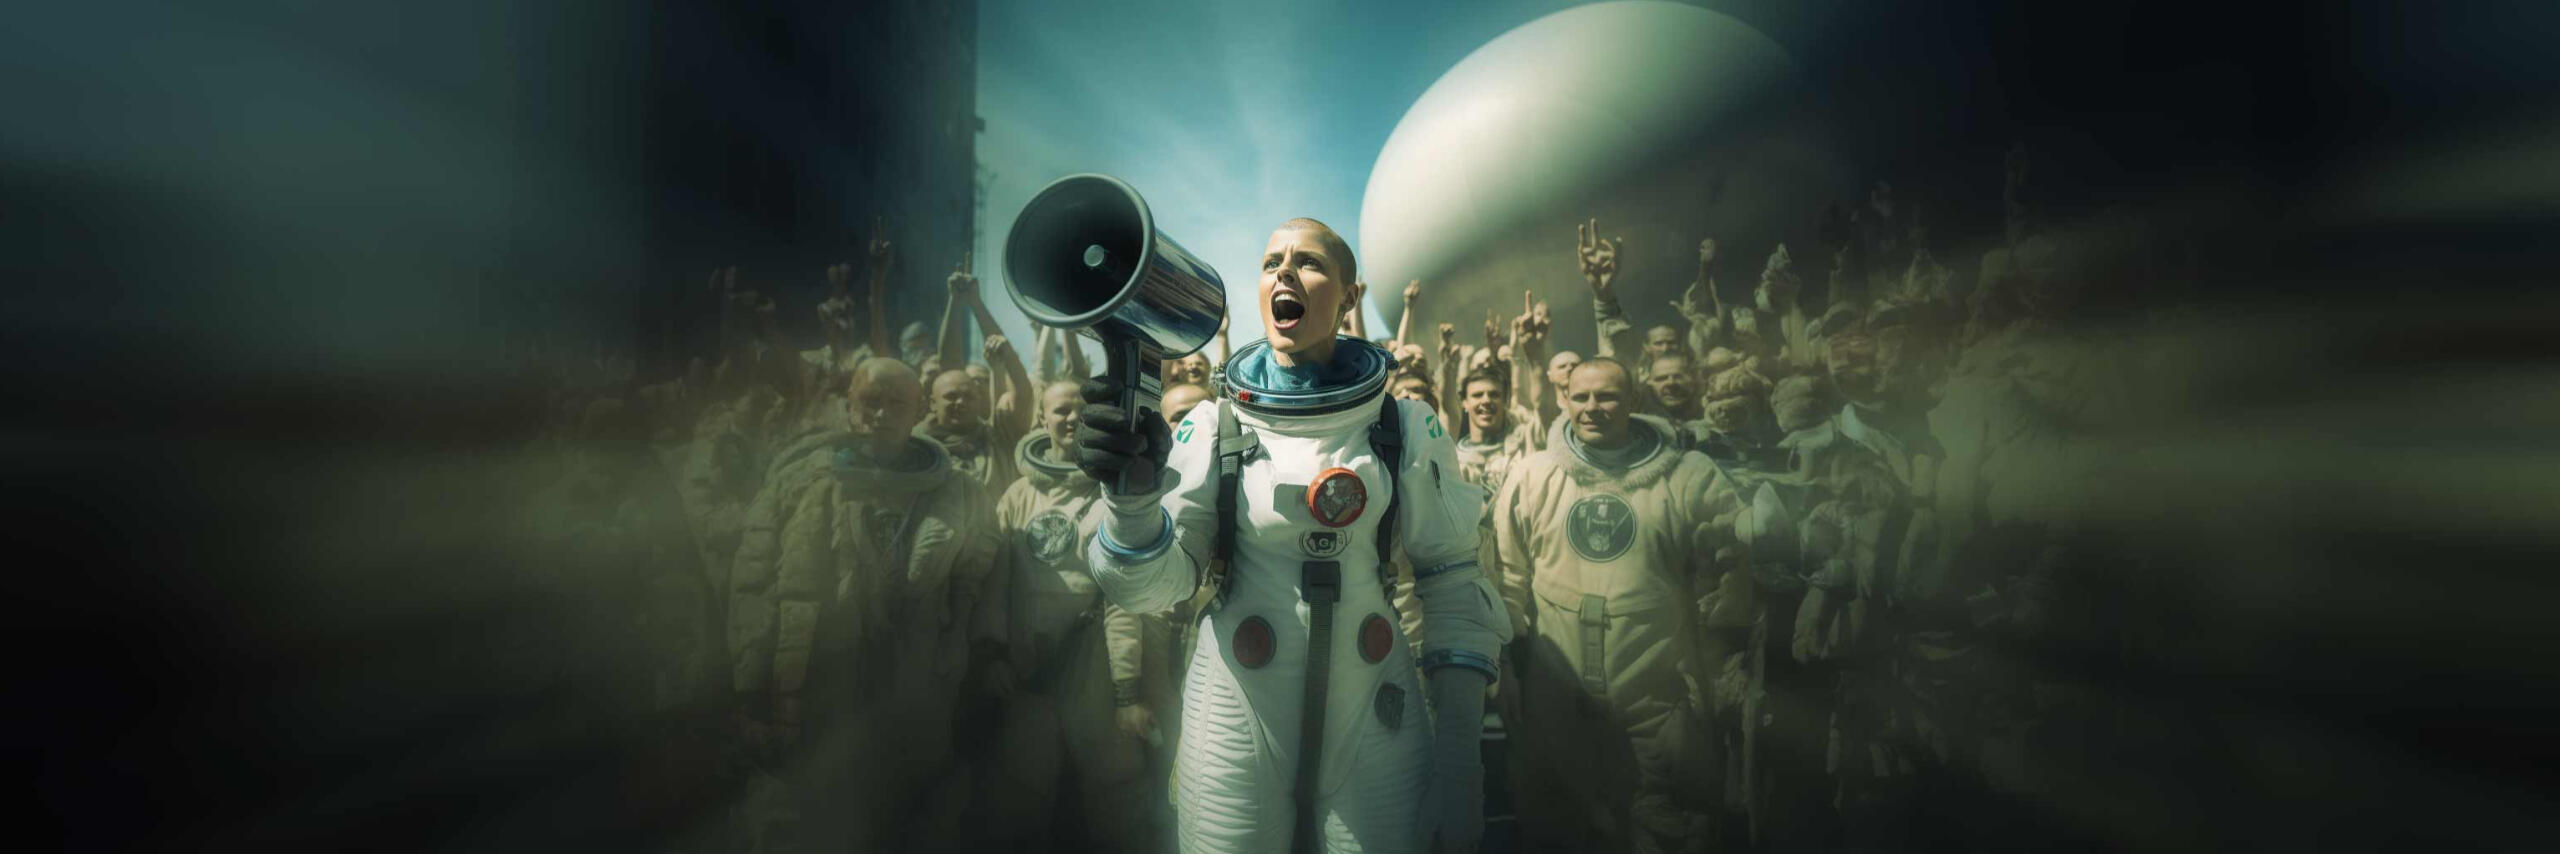 Woman in astronaut shout with a megaphone shouting